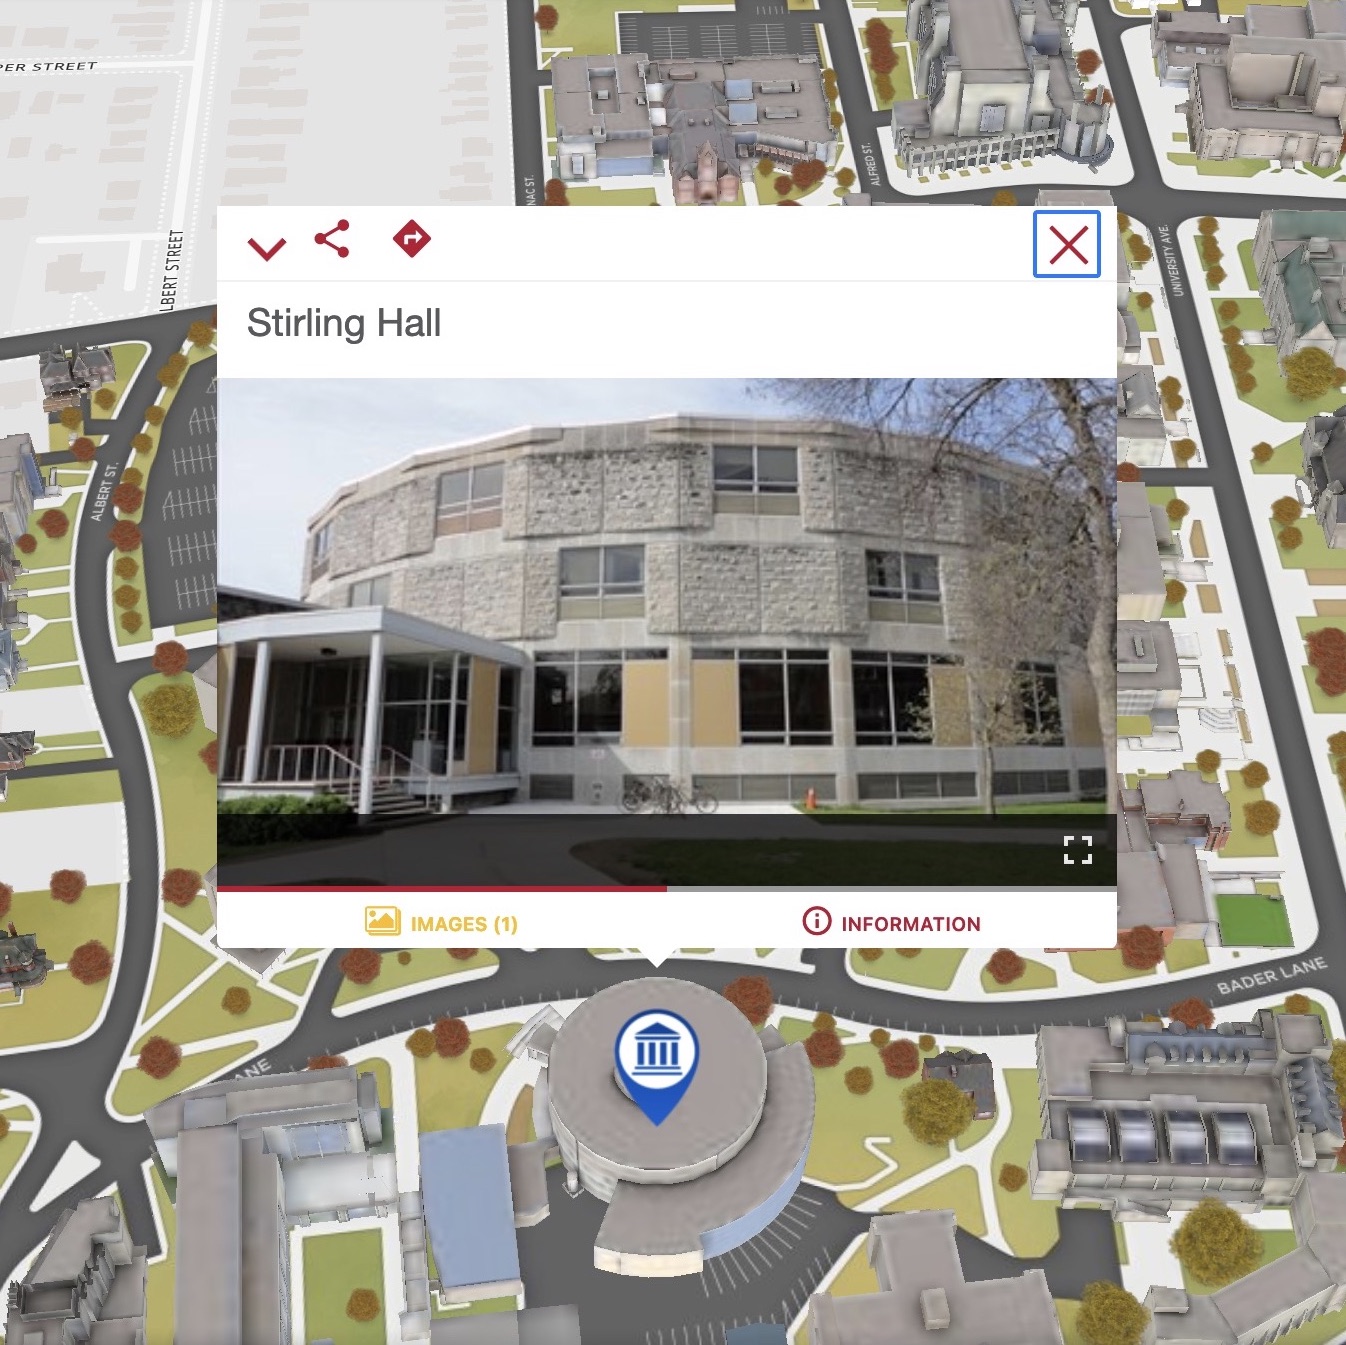 Stirling Hall Interactive Map at Queen's University Campus in Ontario, Canada